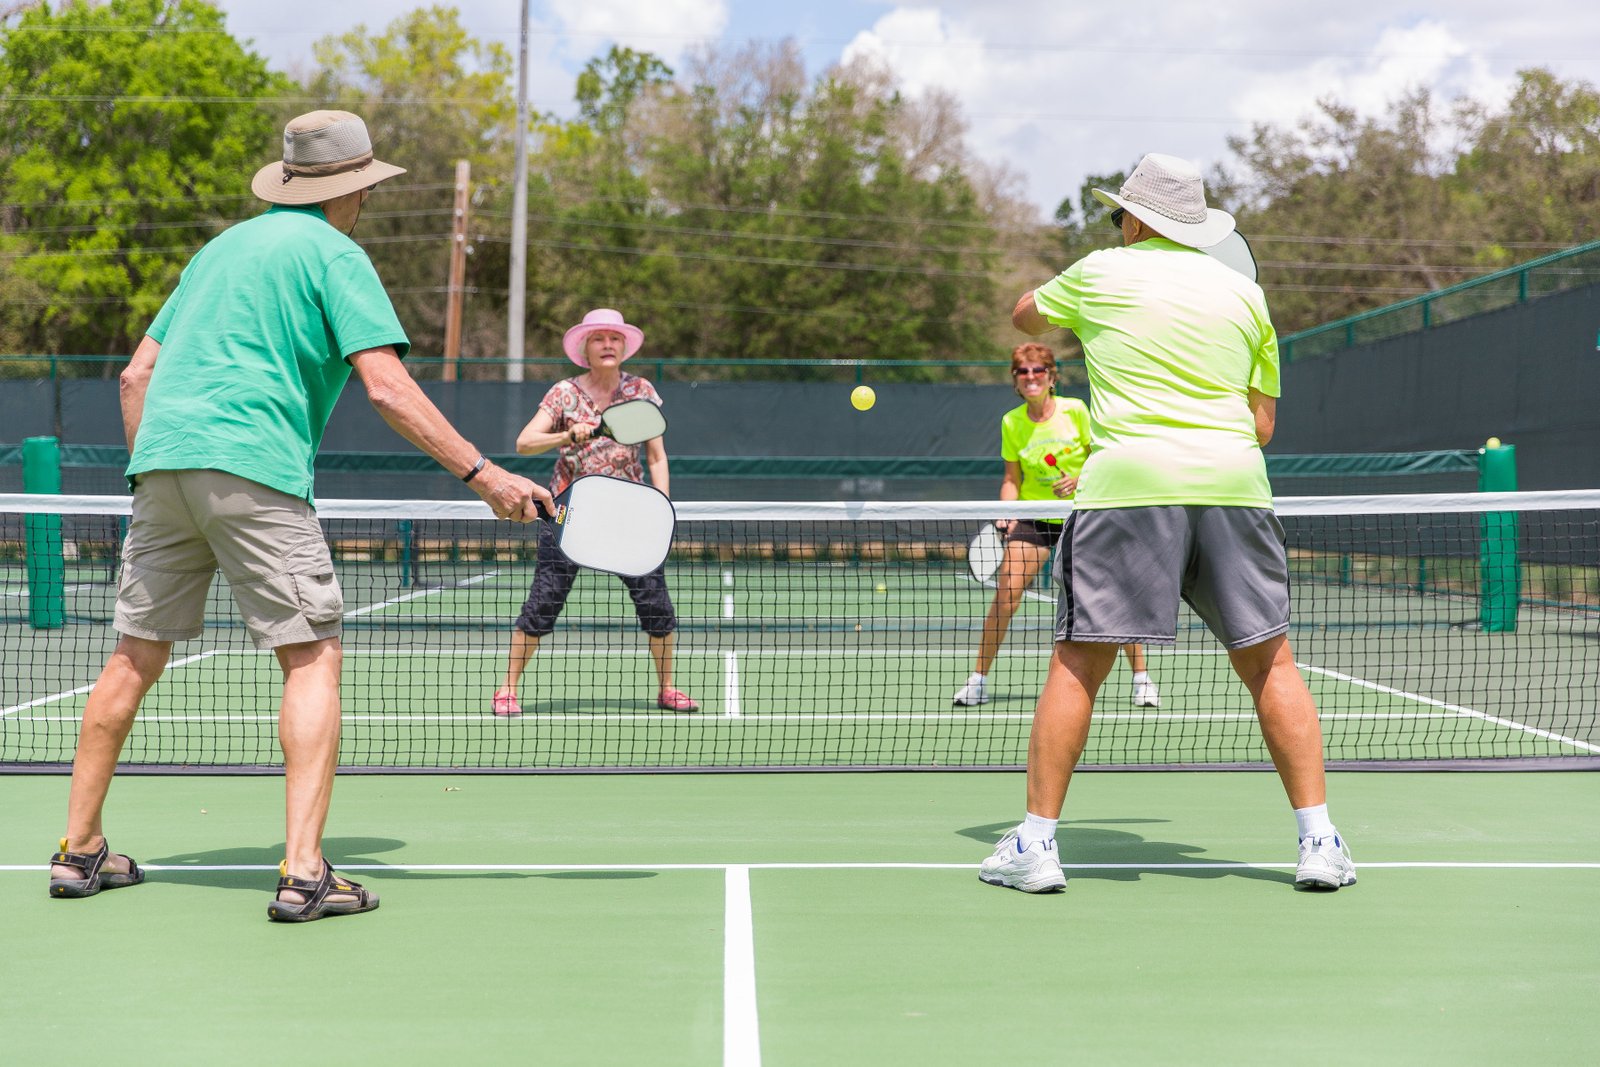 Pickleball Fitness Footwear: Finding the Perfect Pair for On-court Performance